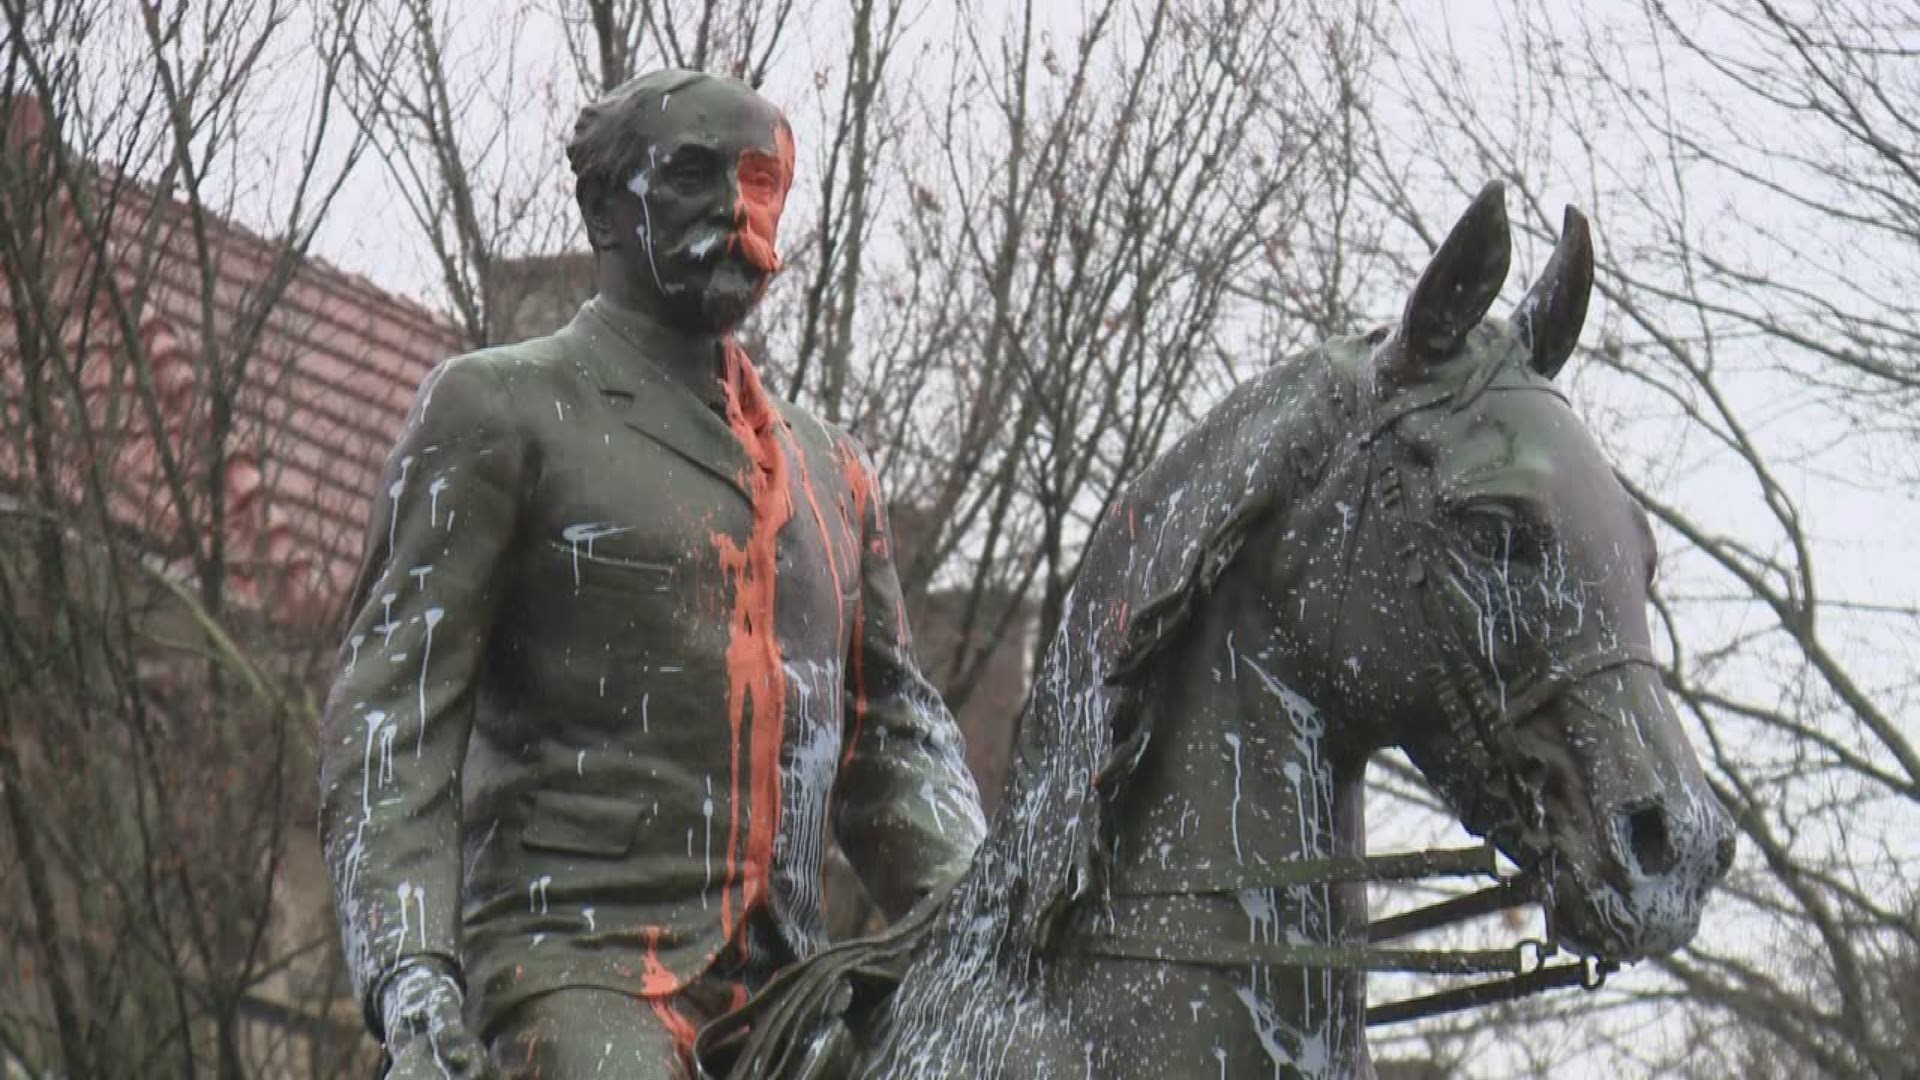 The city's Landmark Commission voted 4-3 last May to remove the controversial statue to Cave Hill Cemetery.